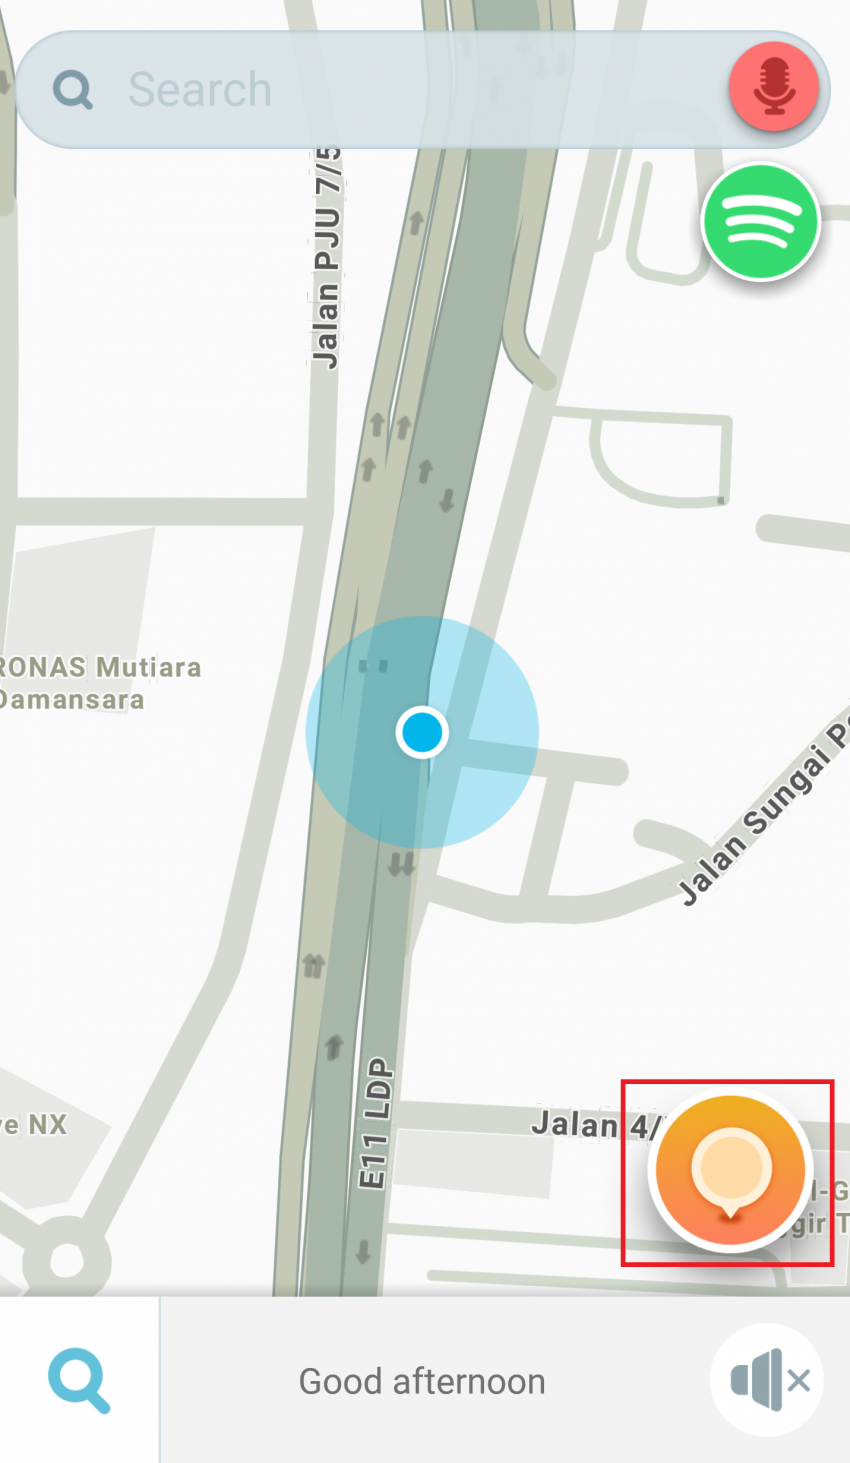 Reporting potholes in Selangor with the Waze app 749830